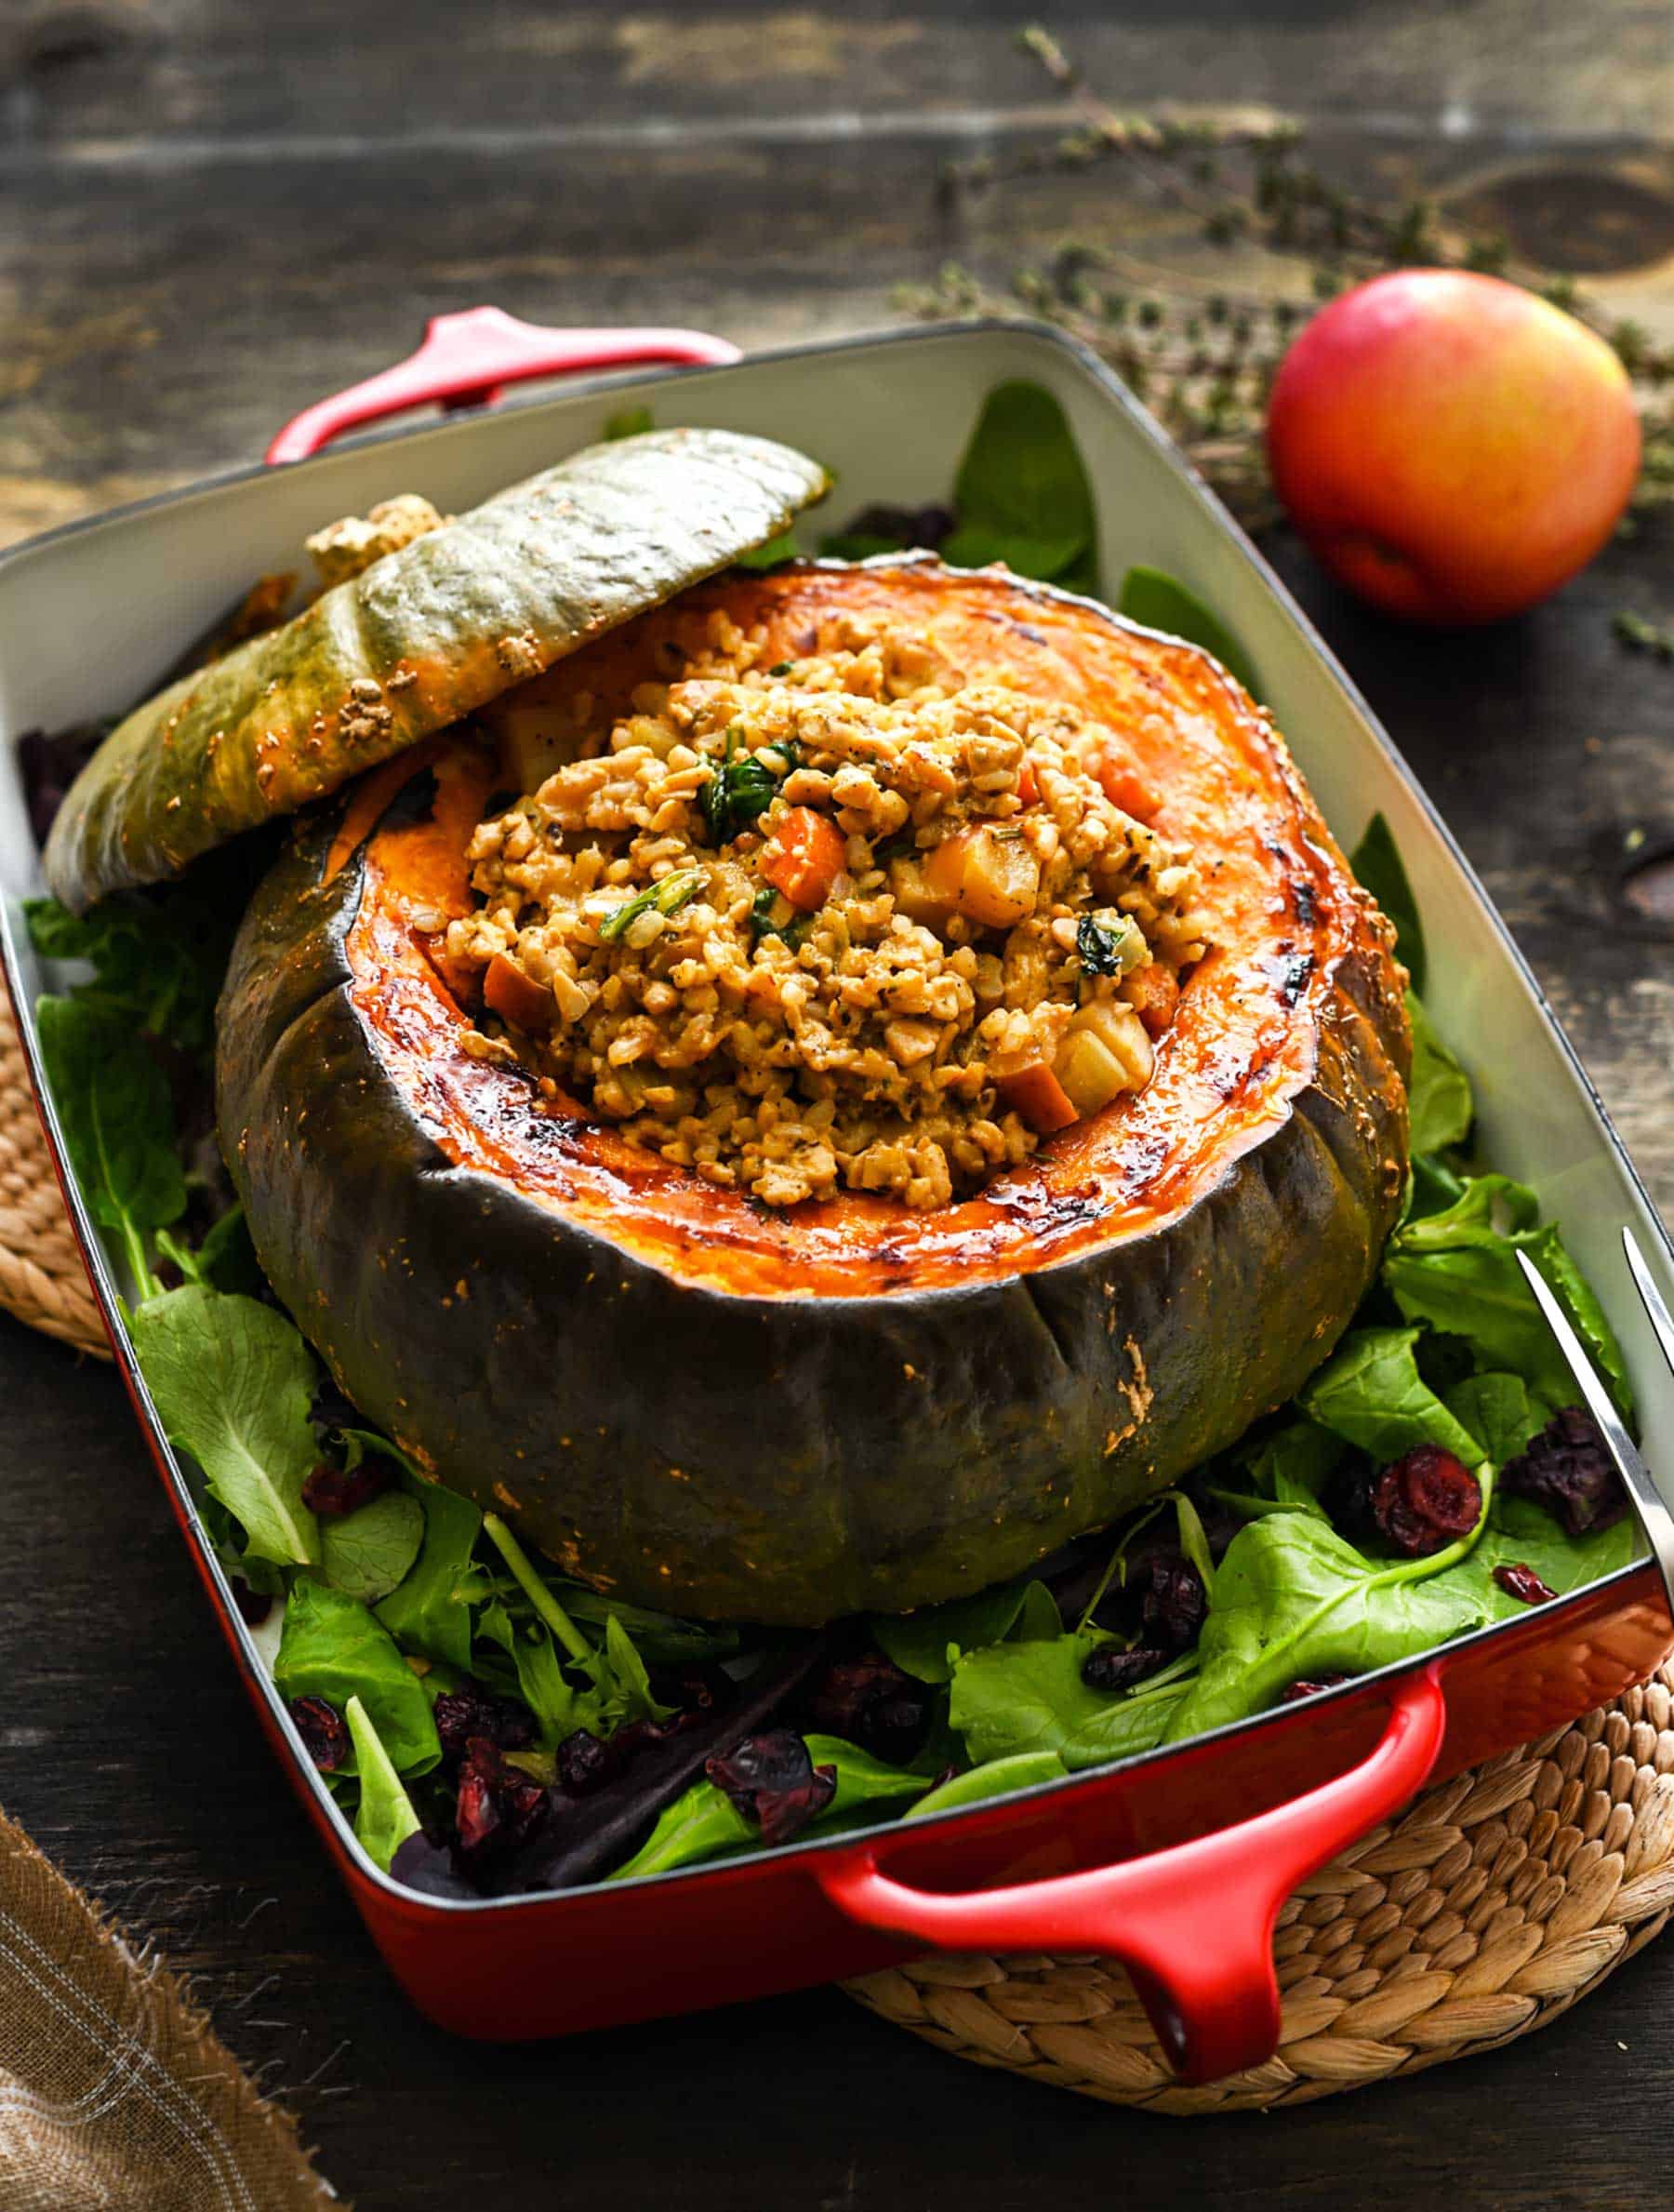 A large, roasted kabocha squash centerpiece, in a casserole dish, stuffed with a rice/tempeh mixture, on a dark background.